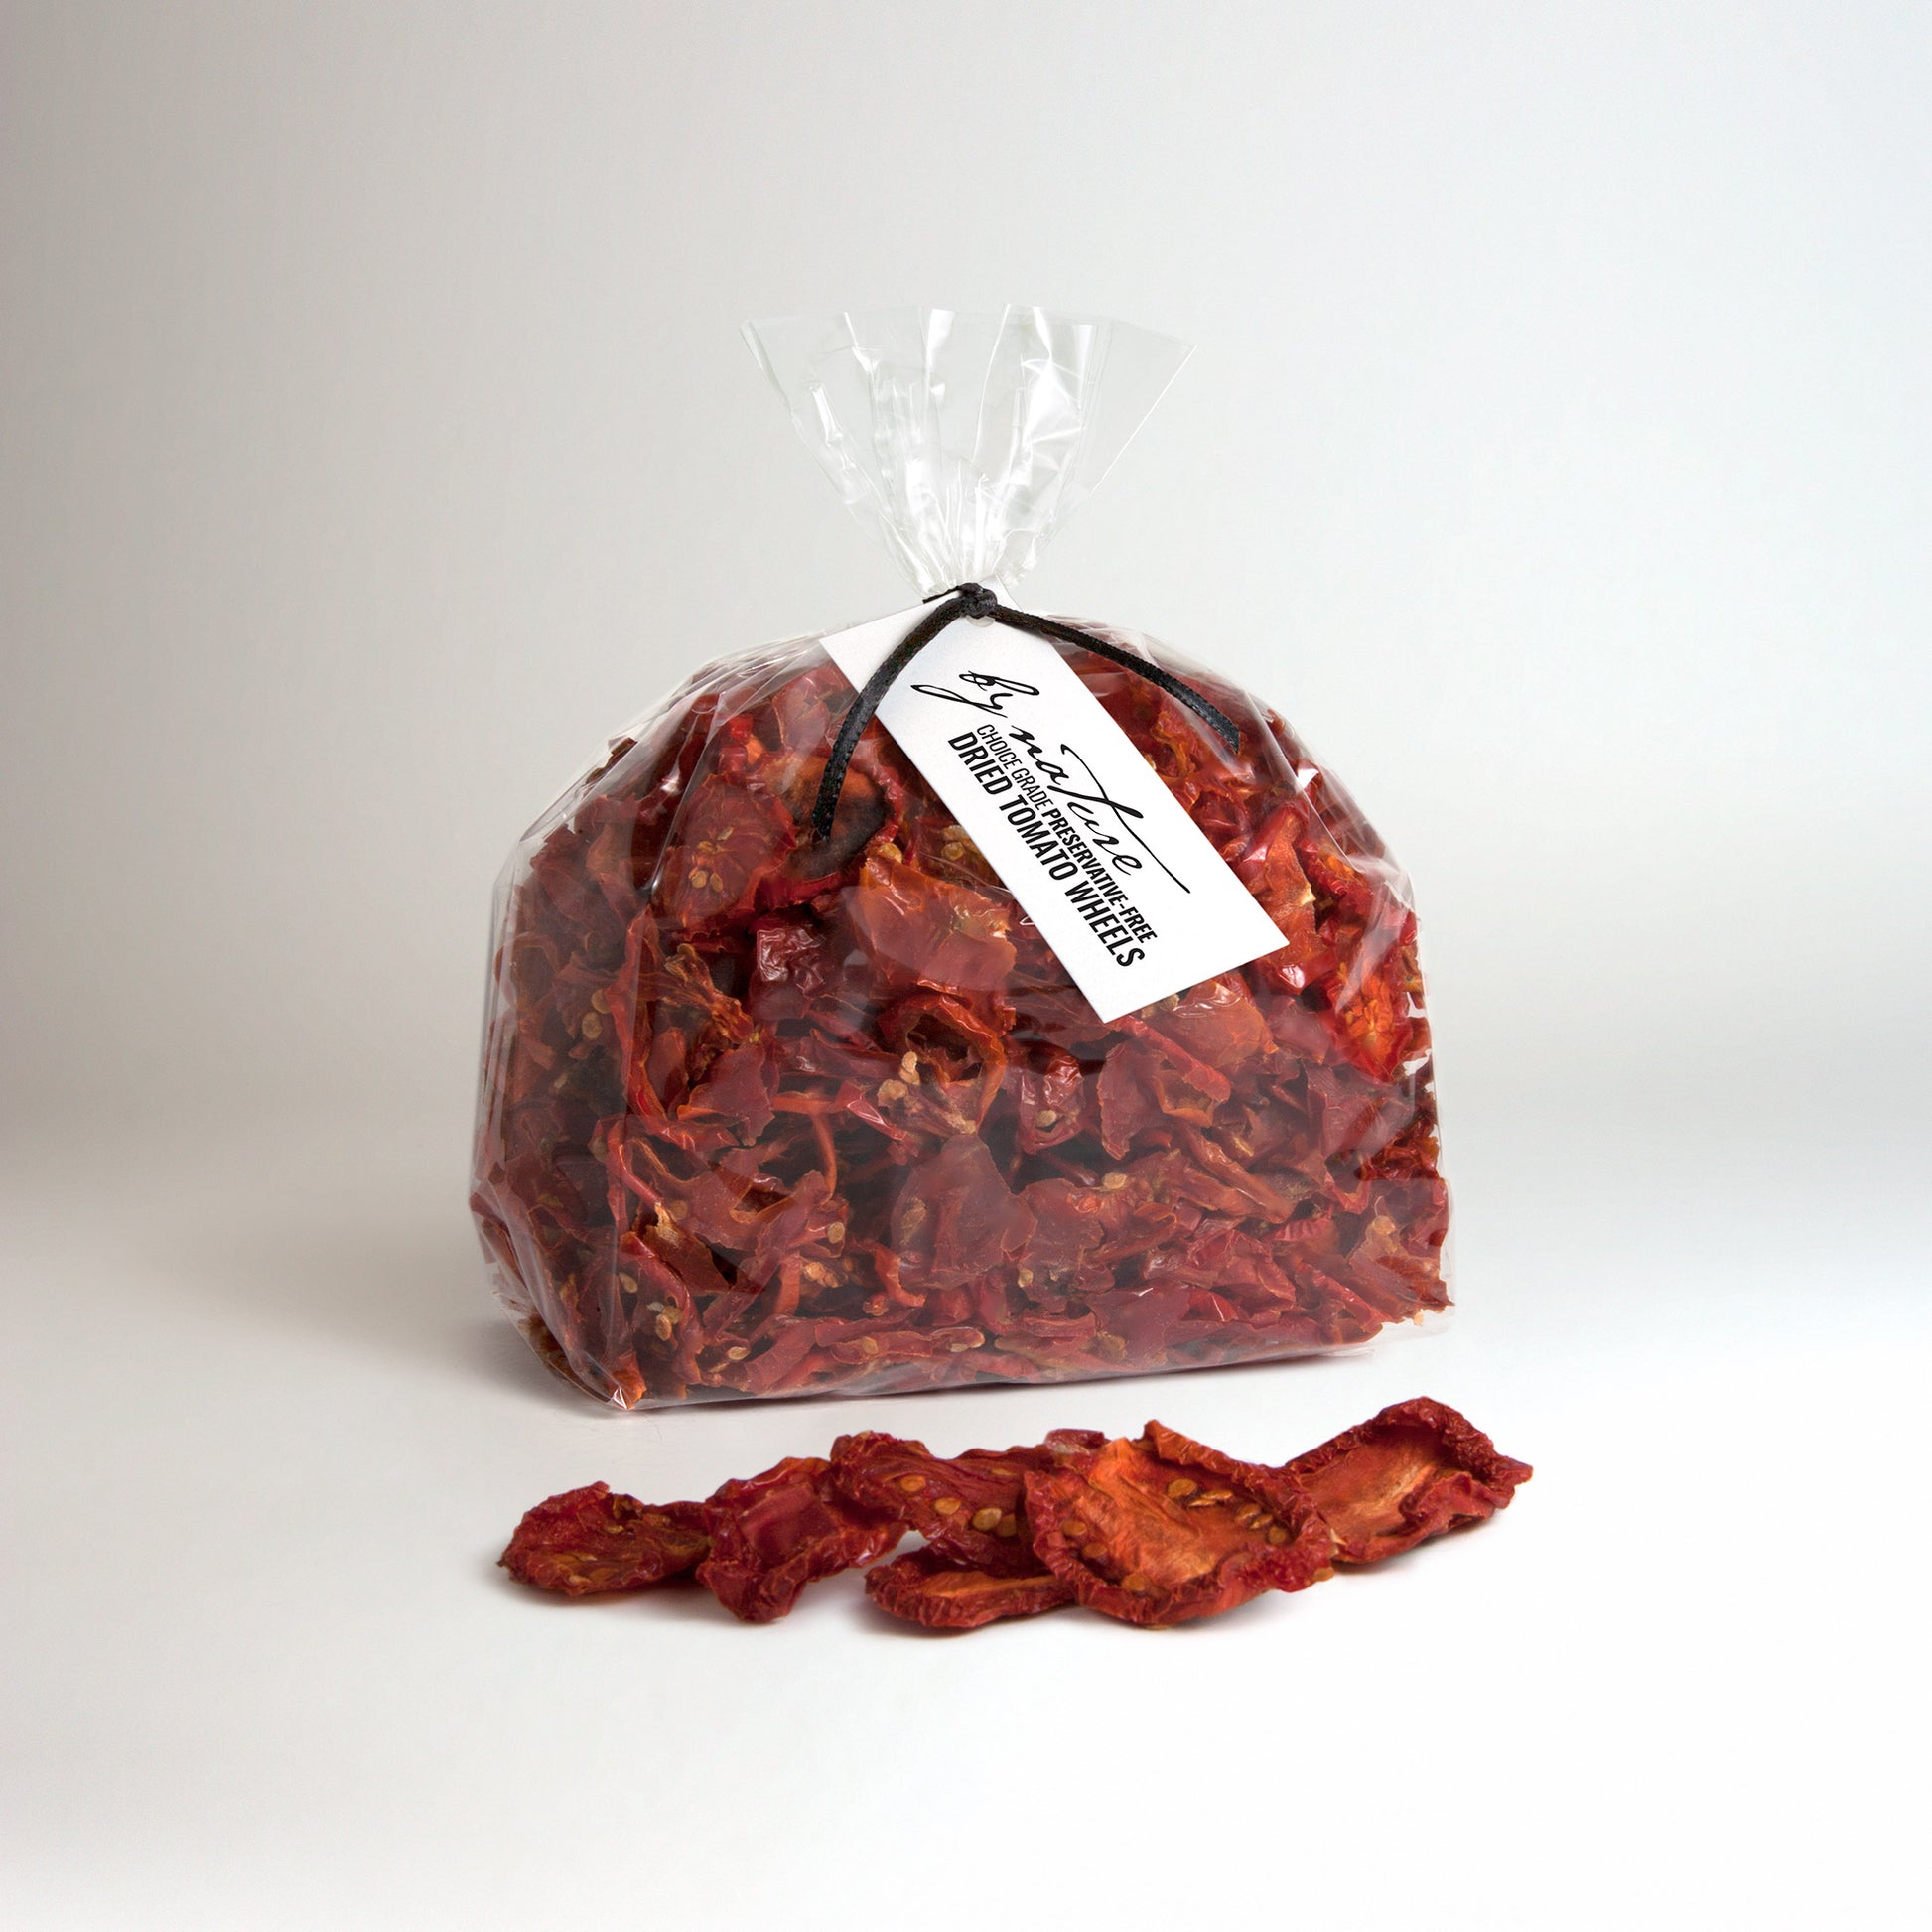 BY NATURE Dried Tomato Slices, 250g - preservative-free.